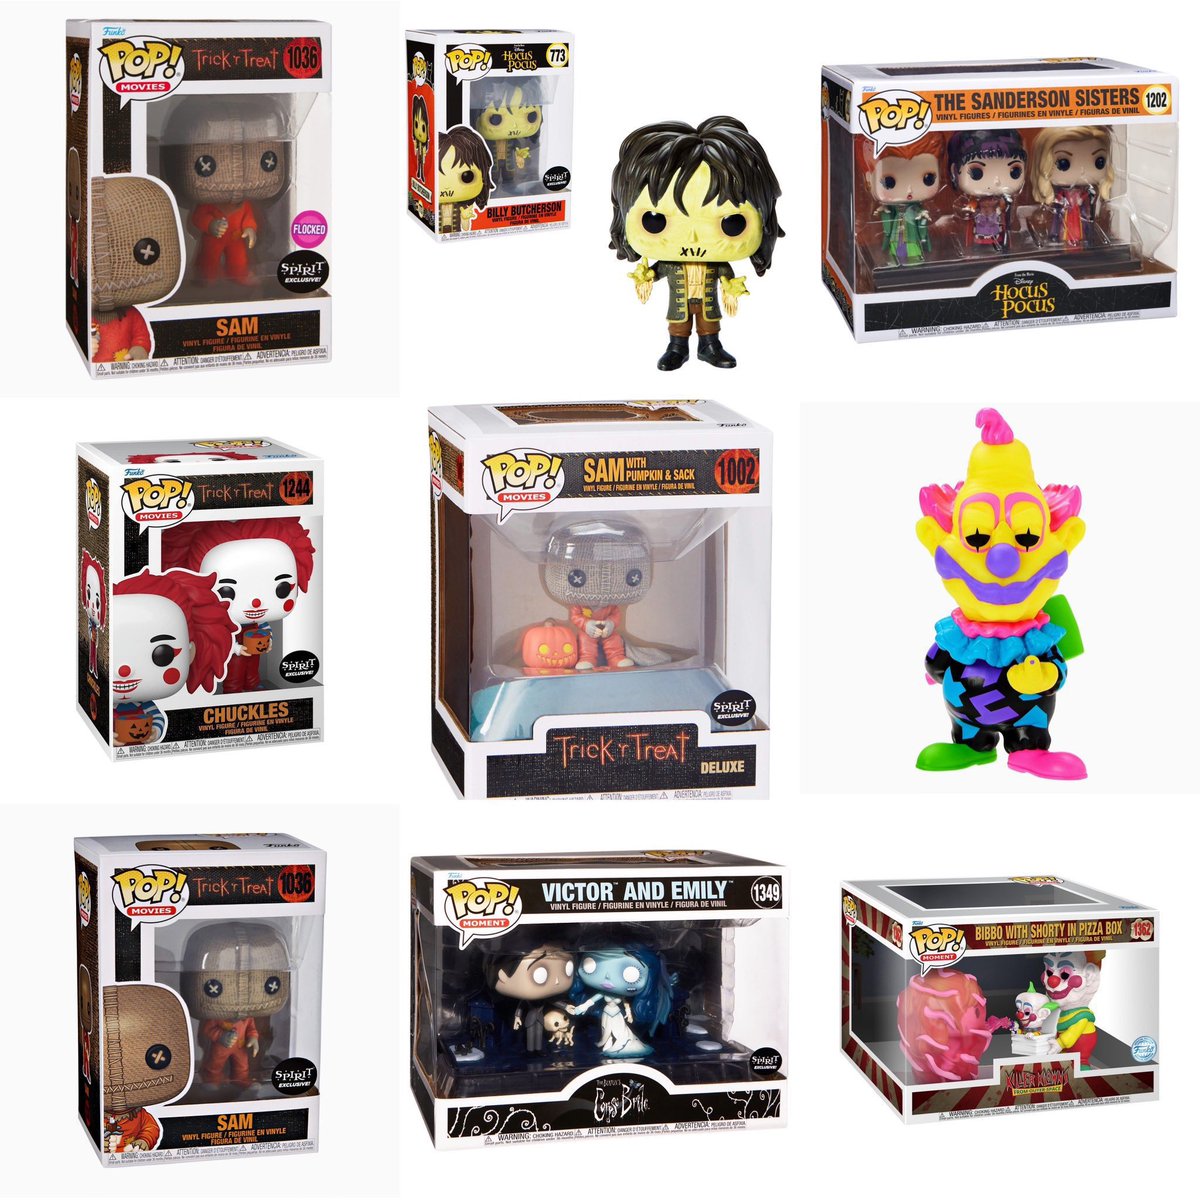 Deal 🚨- Spirit Halloween exclusives are available for as low as $5 at Amazon! #Ad #Funko #Collectibles . amzn.to/3TGkW1J